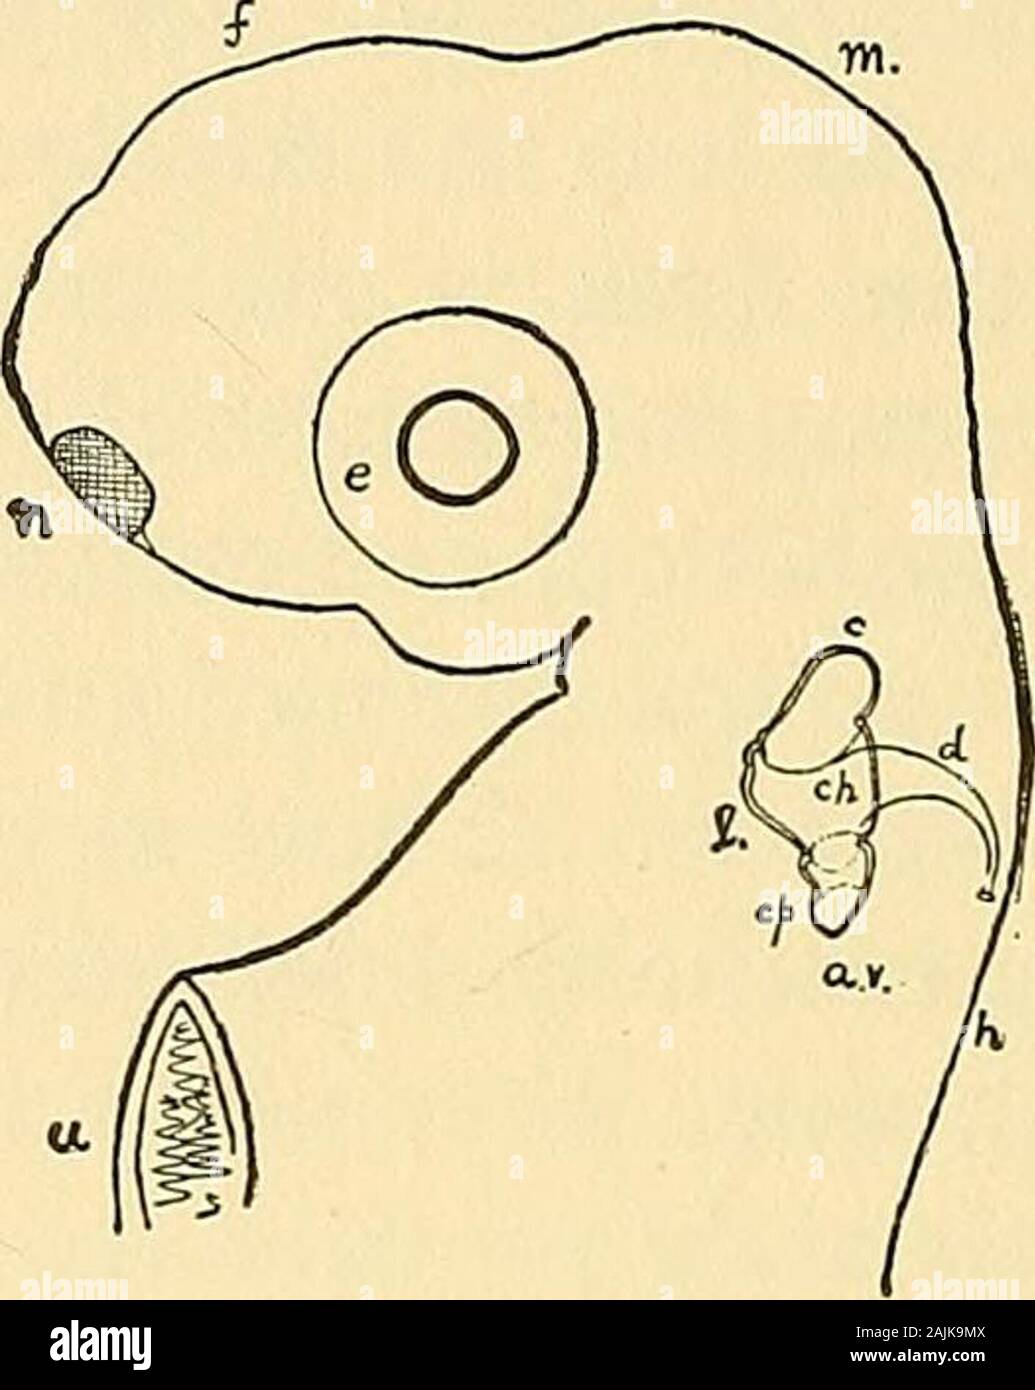 Journal of morphology . Cut j8. — The head of theembryo Smooth Dogfish(^Galeus canis), seen fromthe left side. Figure drawnfrom nature, magnifiedabout 20 times. Theflask-shaped auditory vesi-cle is shown prominentlyplaced above the gill re-gion. Letters as in thepreceding figure. a.v Auditory flask. e Eye. f Fore-brain. g Gill region. h Hind-brain. m Mid-brain. n Nose.. Cut ig.—The head of an older Sharkof the same species, viewed from theleft side. The figure, which wasdrawn from the living fish, showsthe internal ear well advanced in itsdevelopment. The rudiments of thesemicircular canals an Stock Photo